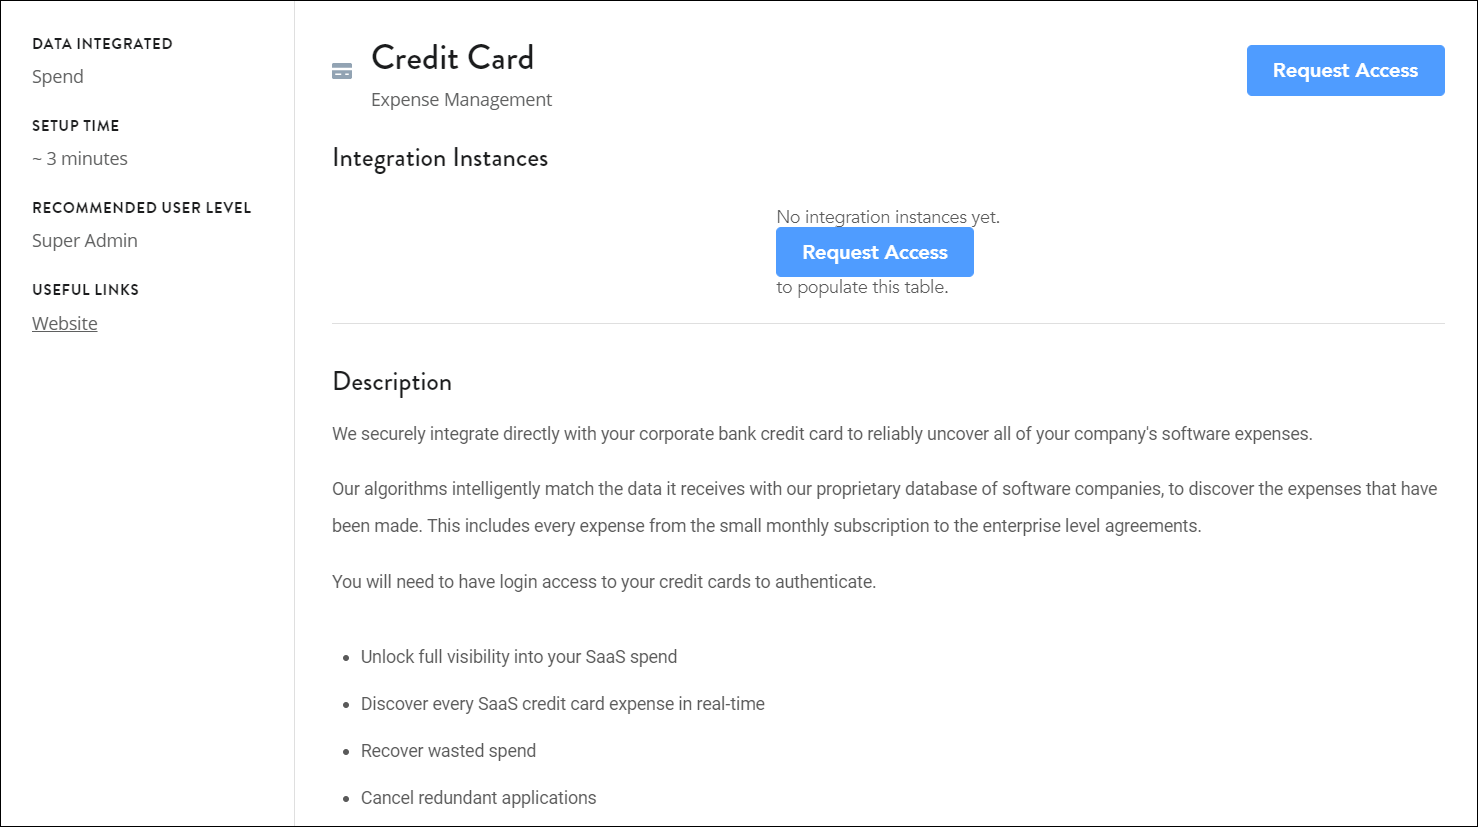 The Credit Card integration page with a Request Access button.